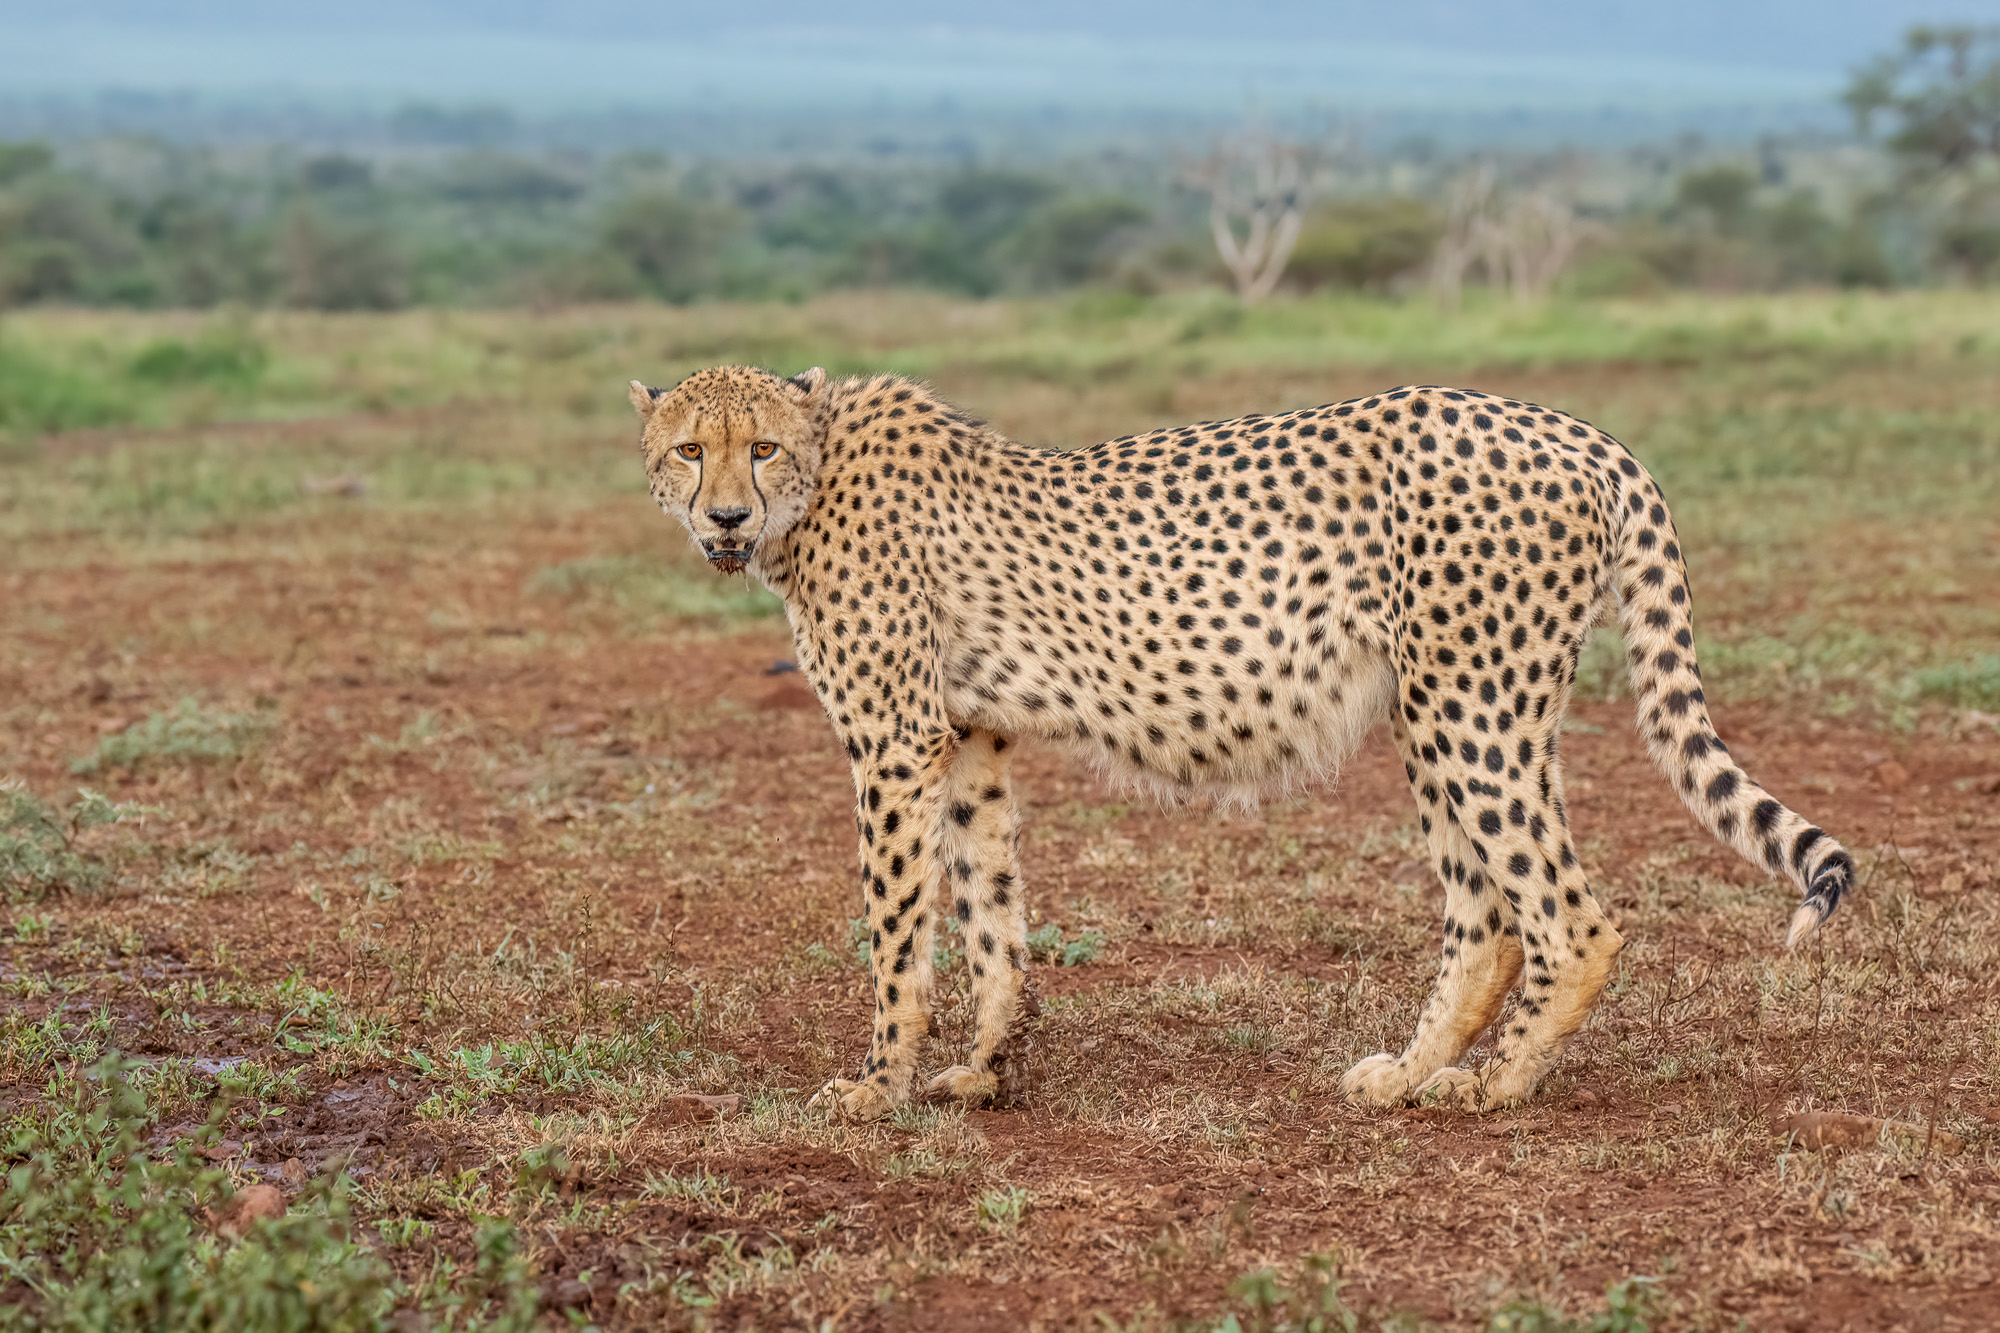 Cheetah with Full Belly by Peter Dominowski